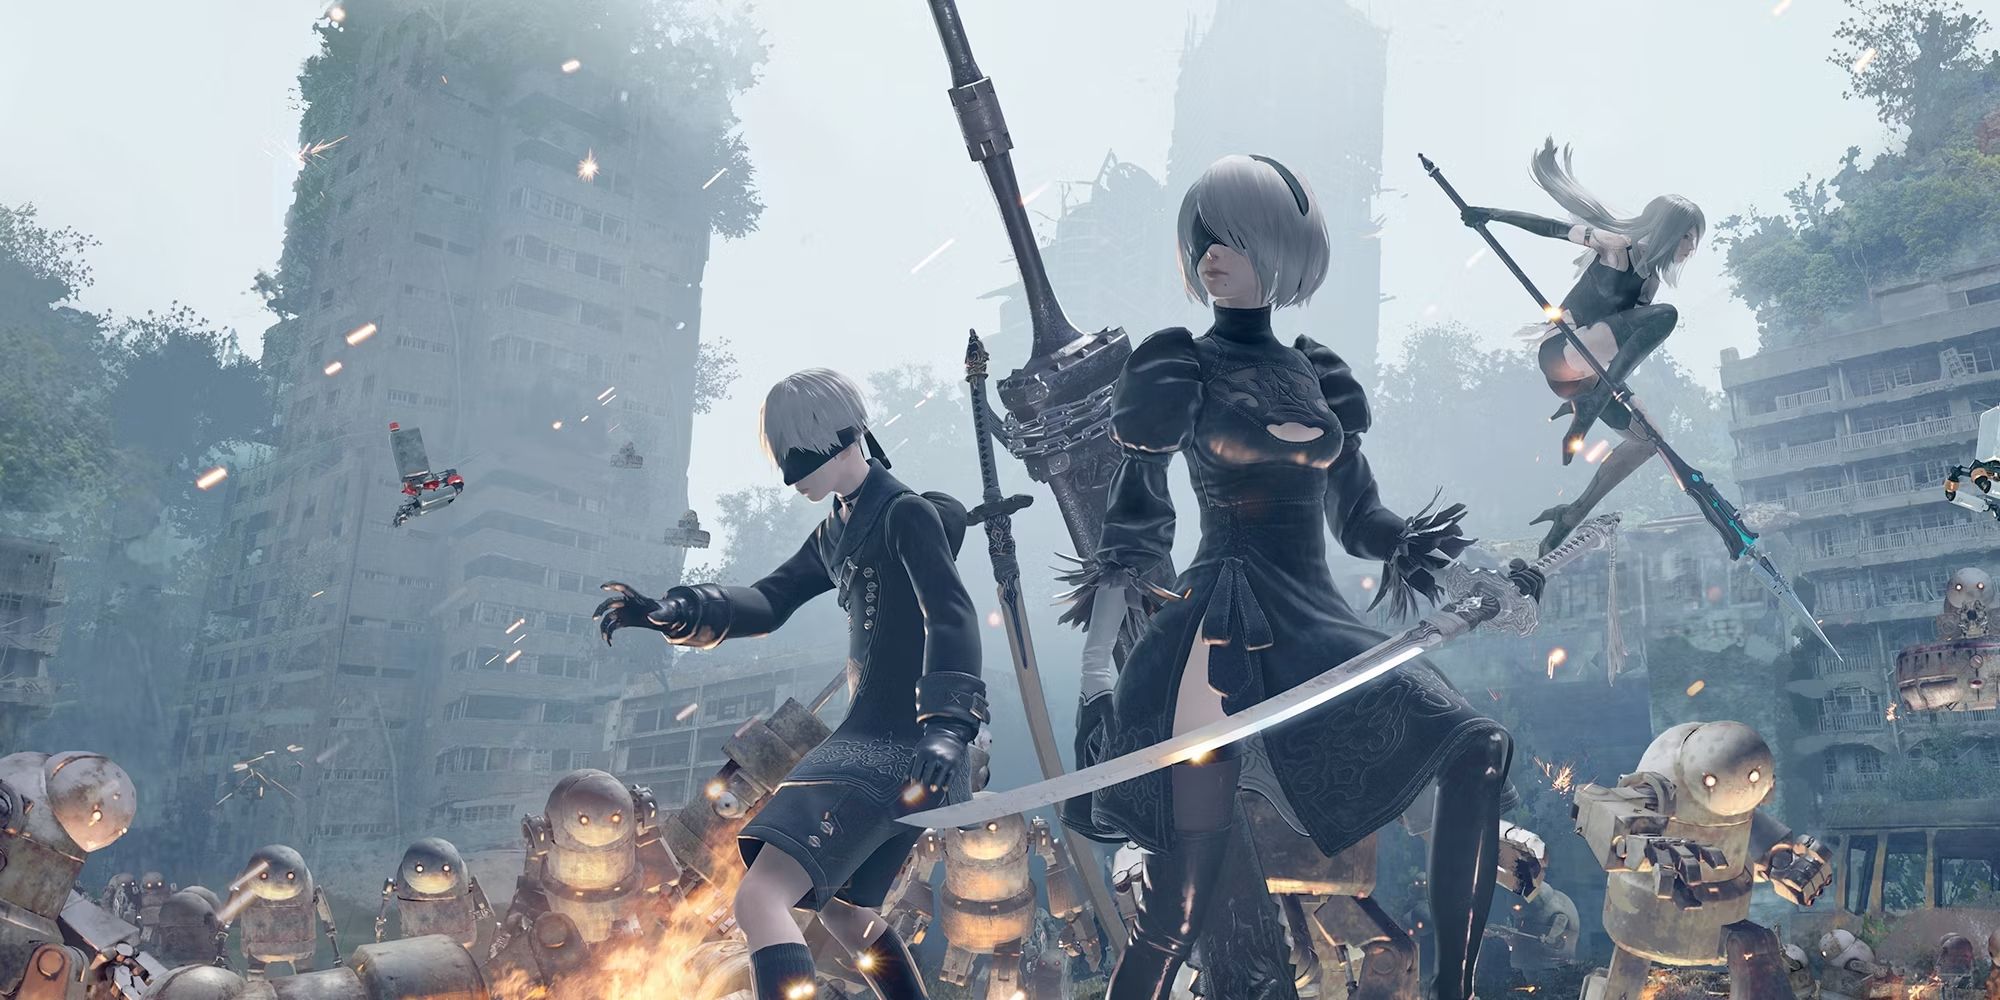 NieR Automata Anime Will Debut On January 7